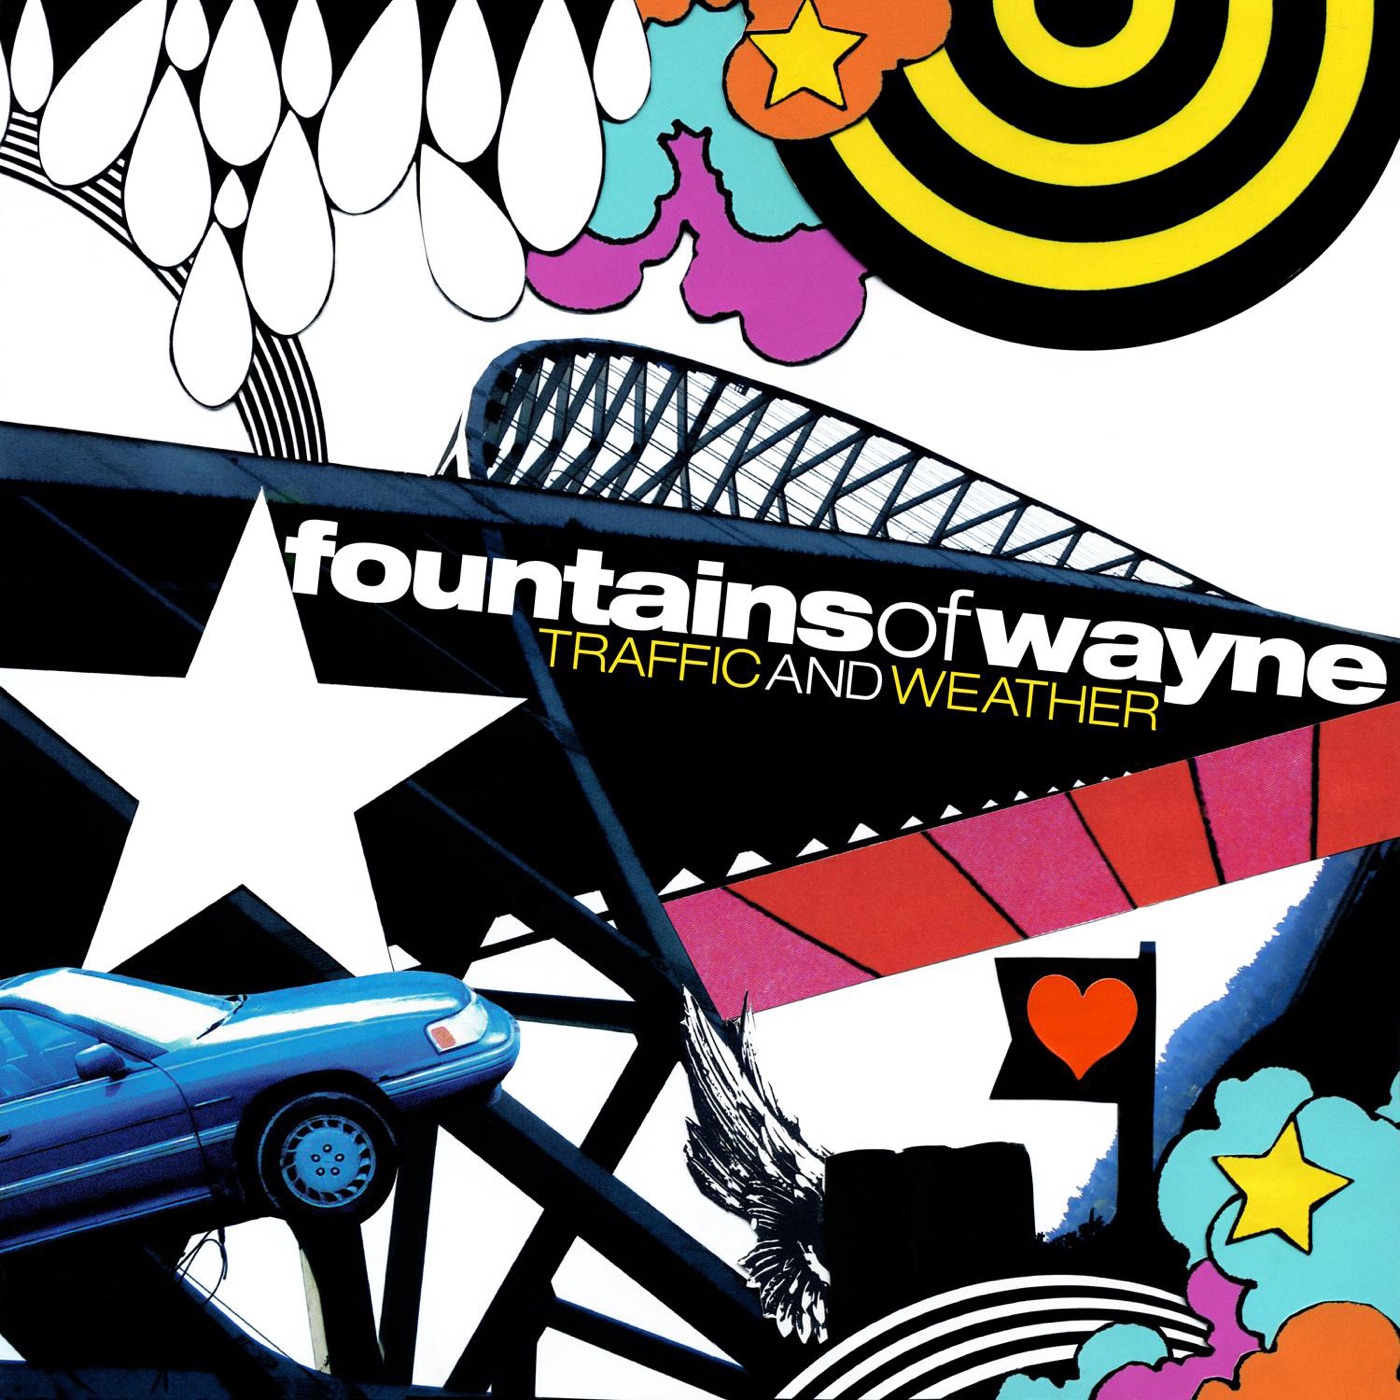 Traffic And Weather by Fountains Of Wayne